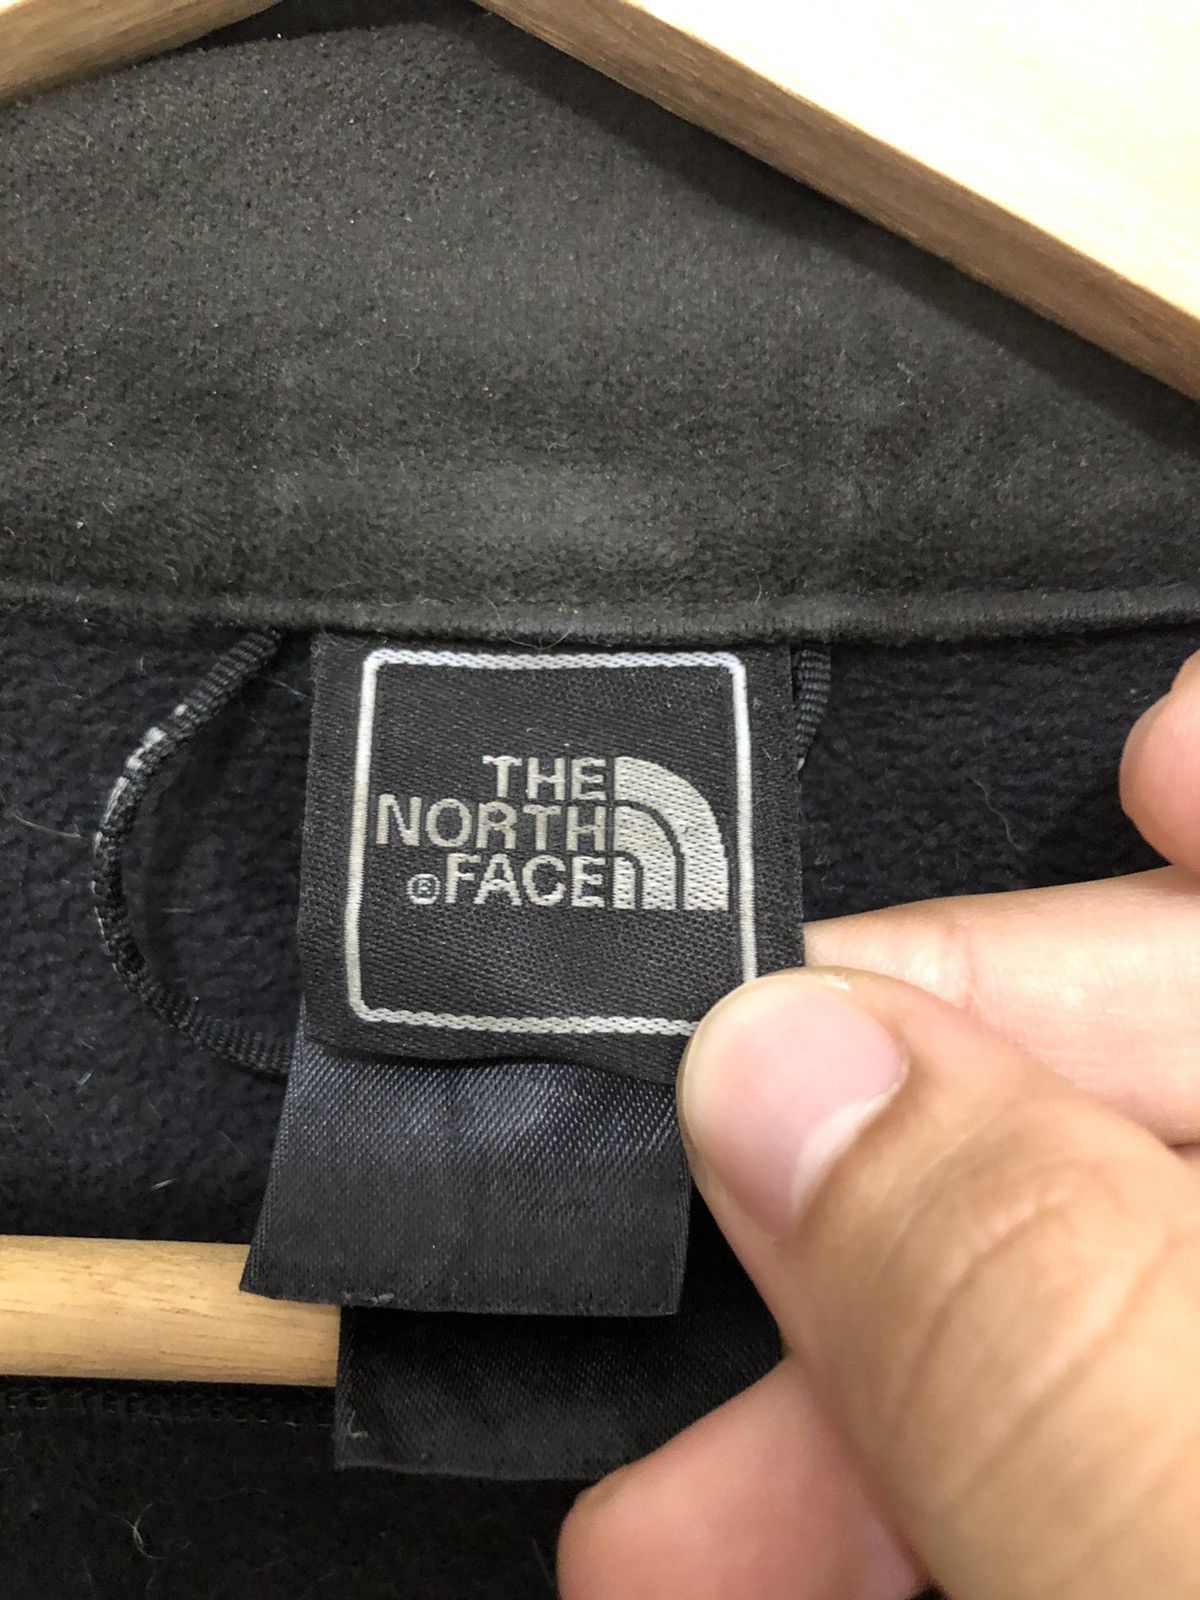 The North Face X Microsoft Game Studios Jacket 2007 - 9